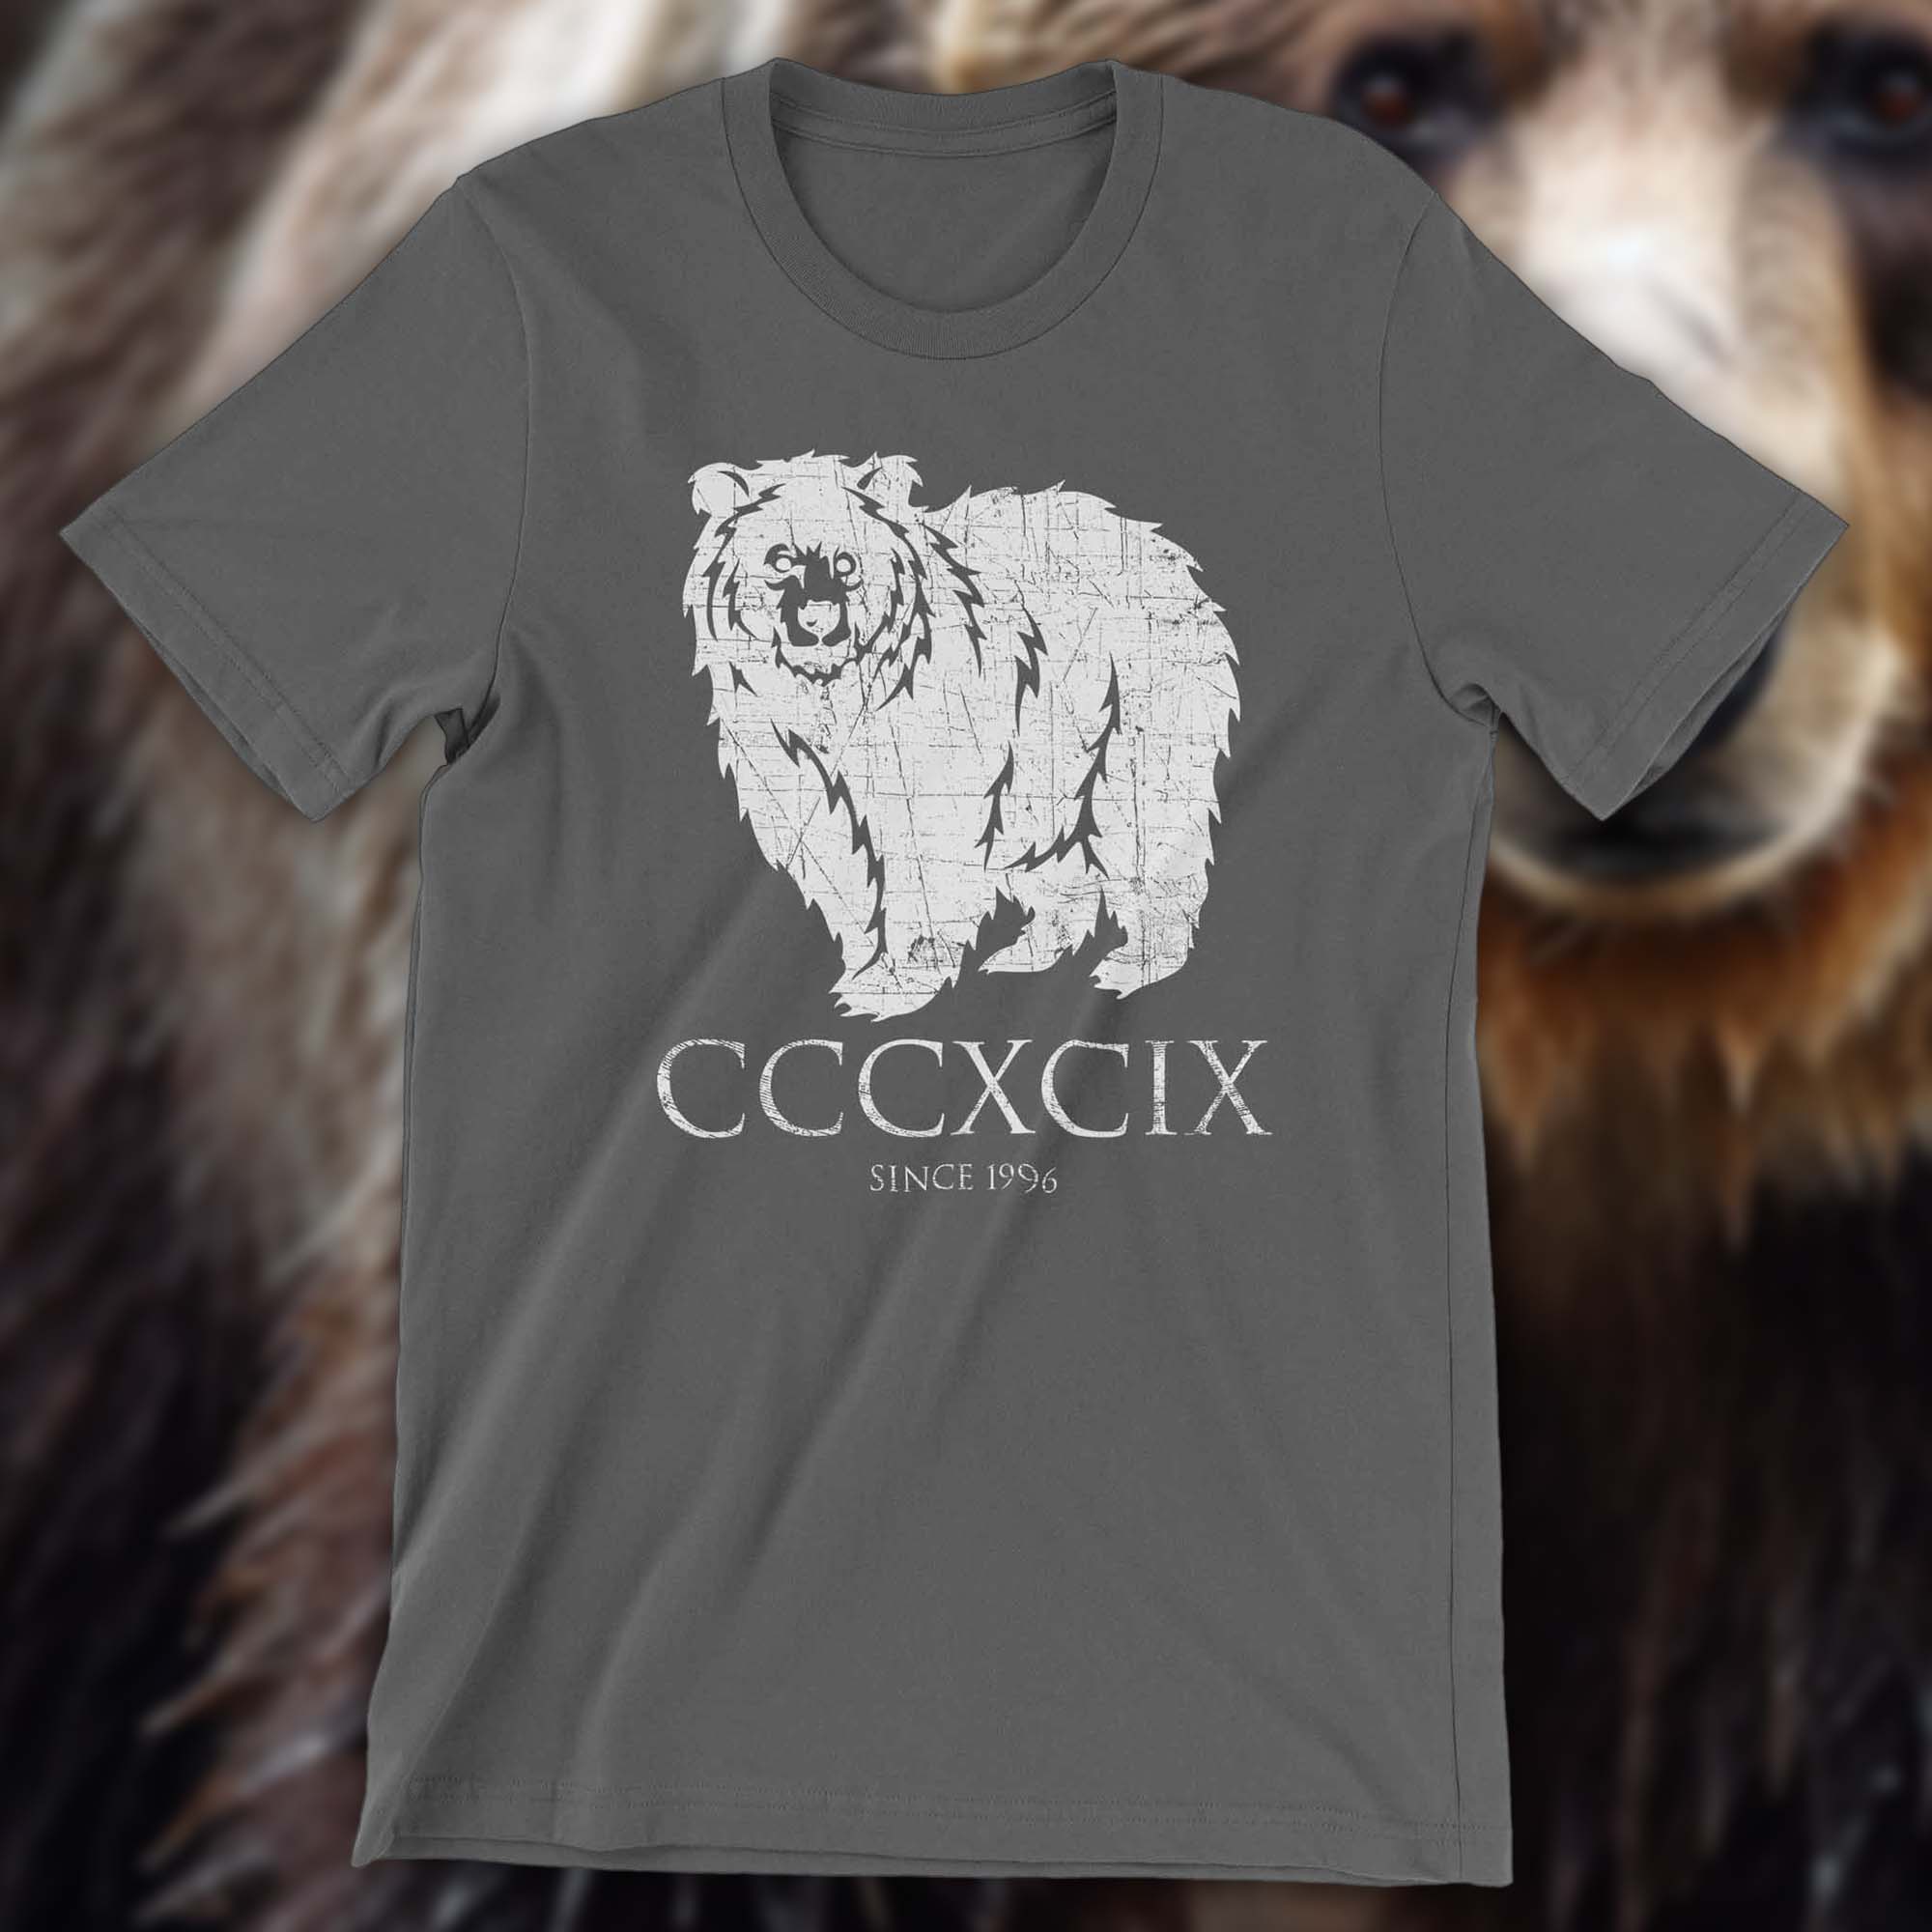 Grizzly 399 shirt with bear in the background